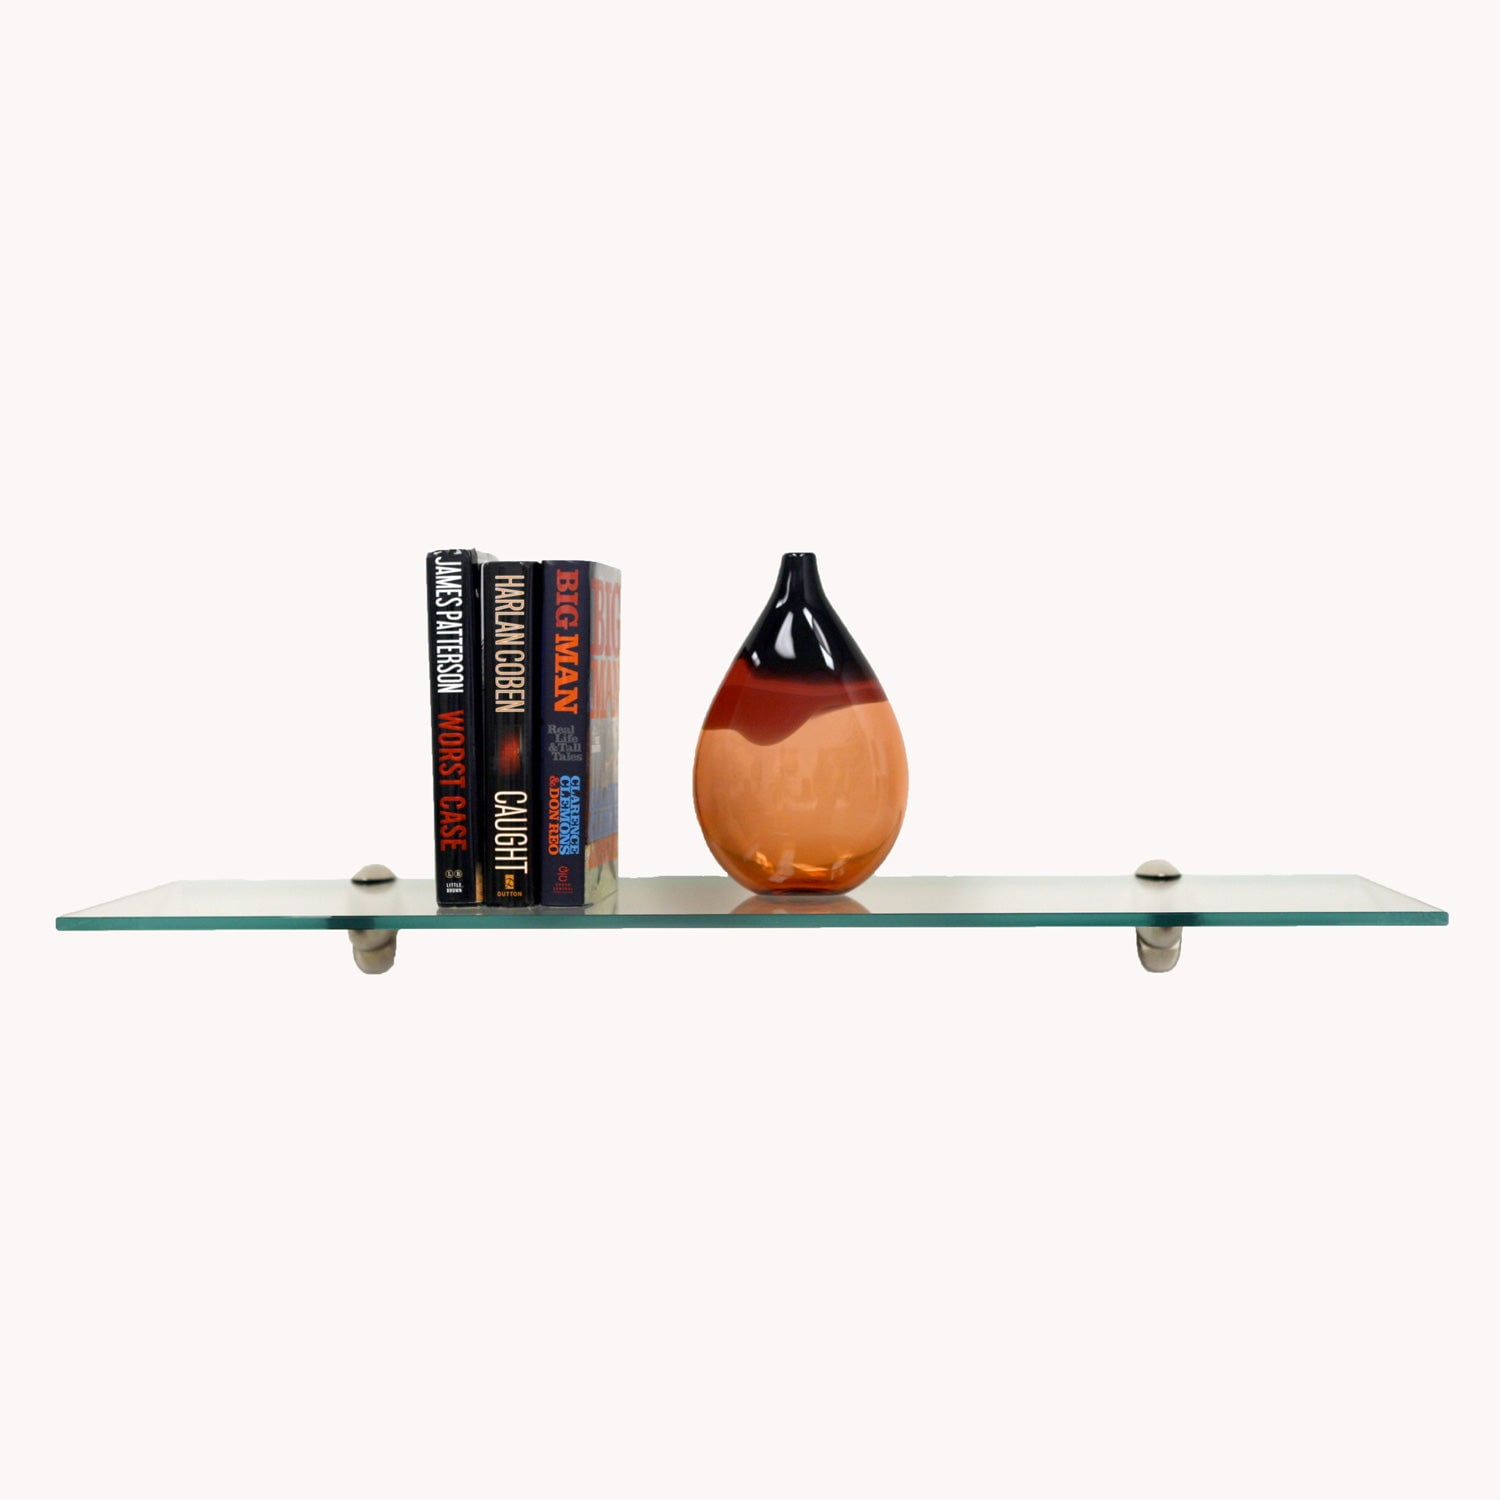 10" X 18" Heron Floating Glass Shelves Brackets Included with Each Shelf  By Spancraft Glass